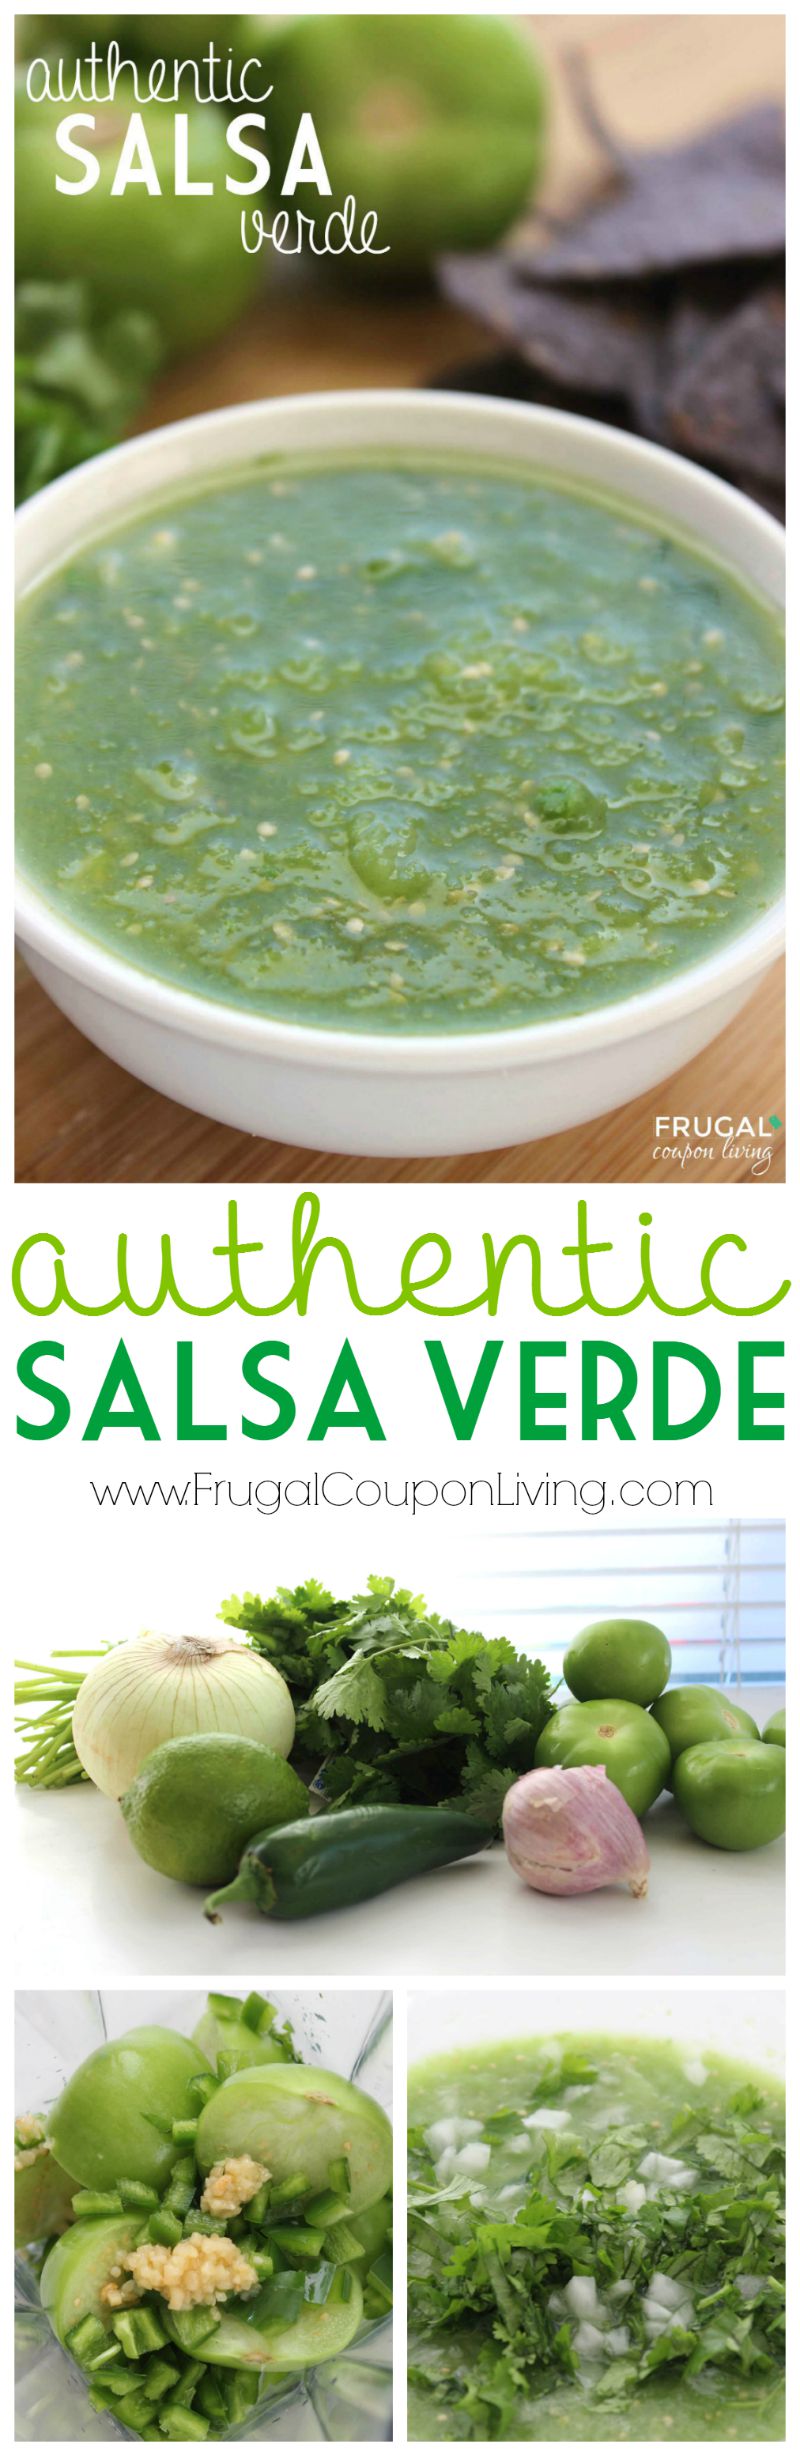 authentic-salsa-verde-Collage-frugal-coupon-living